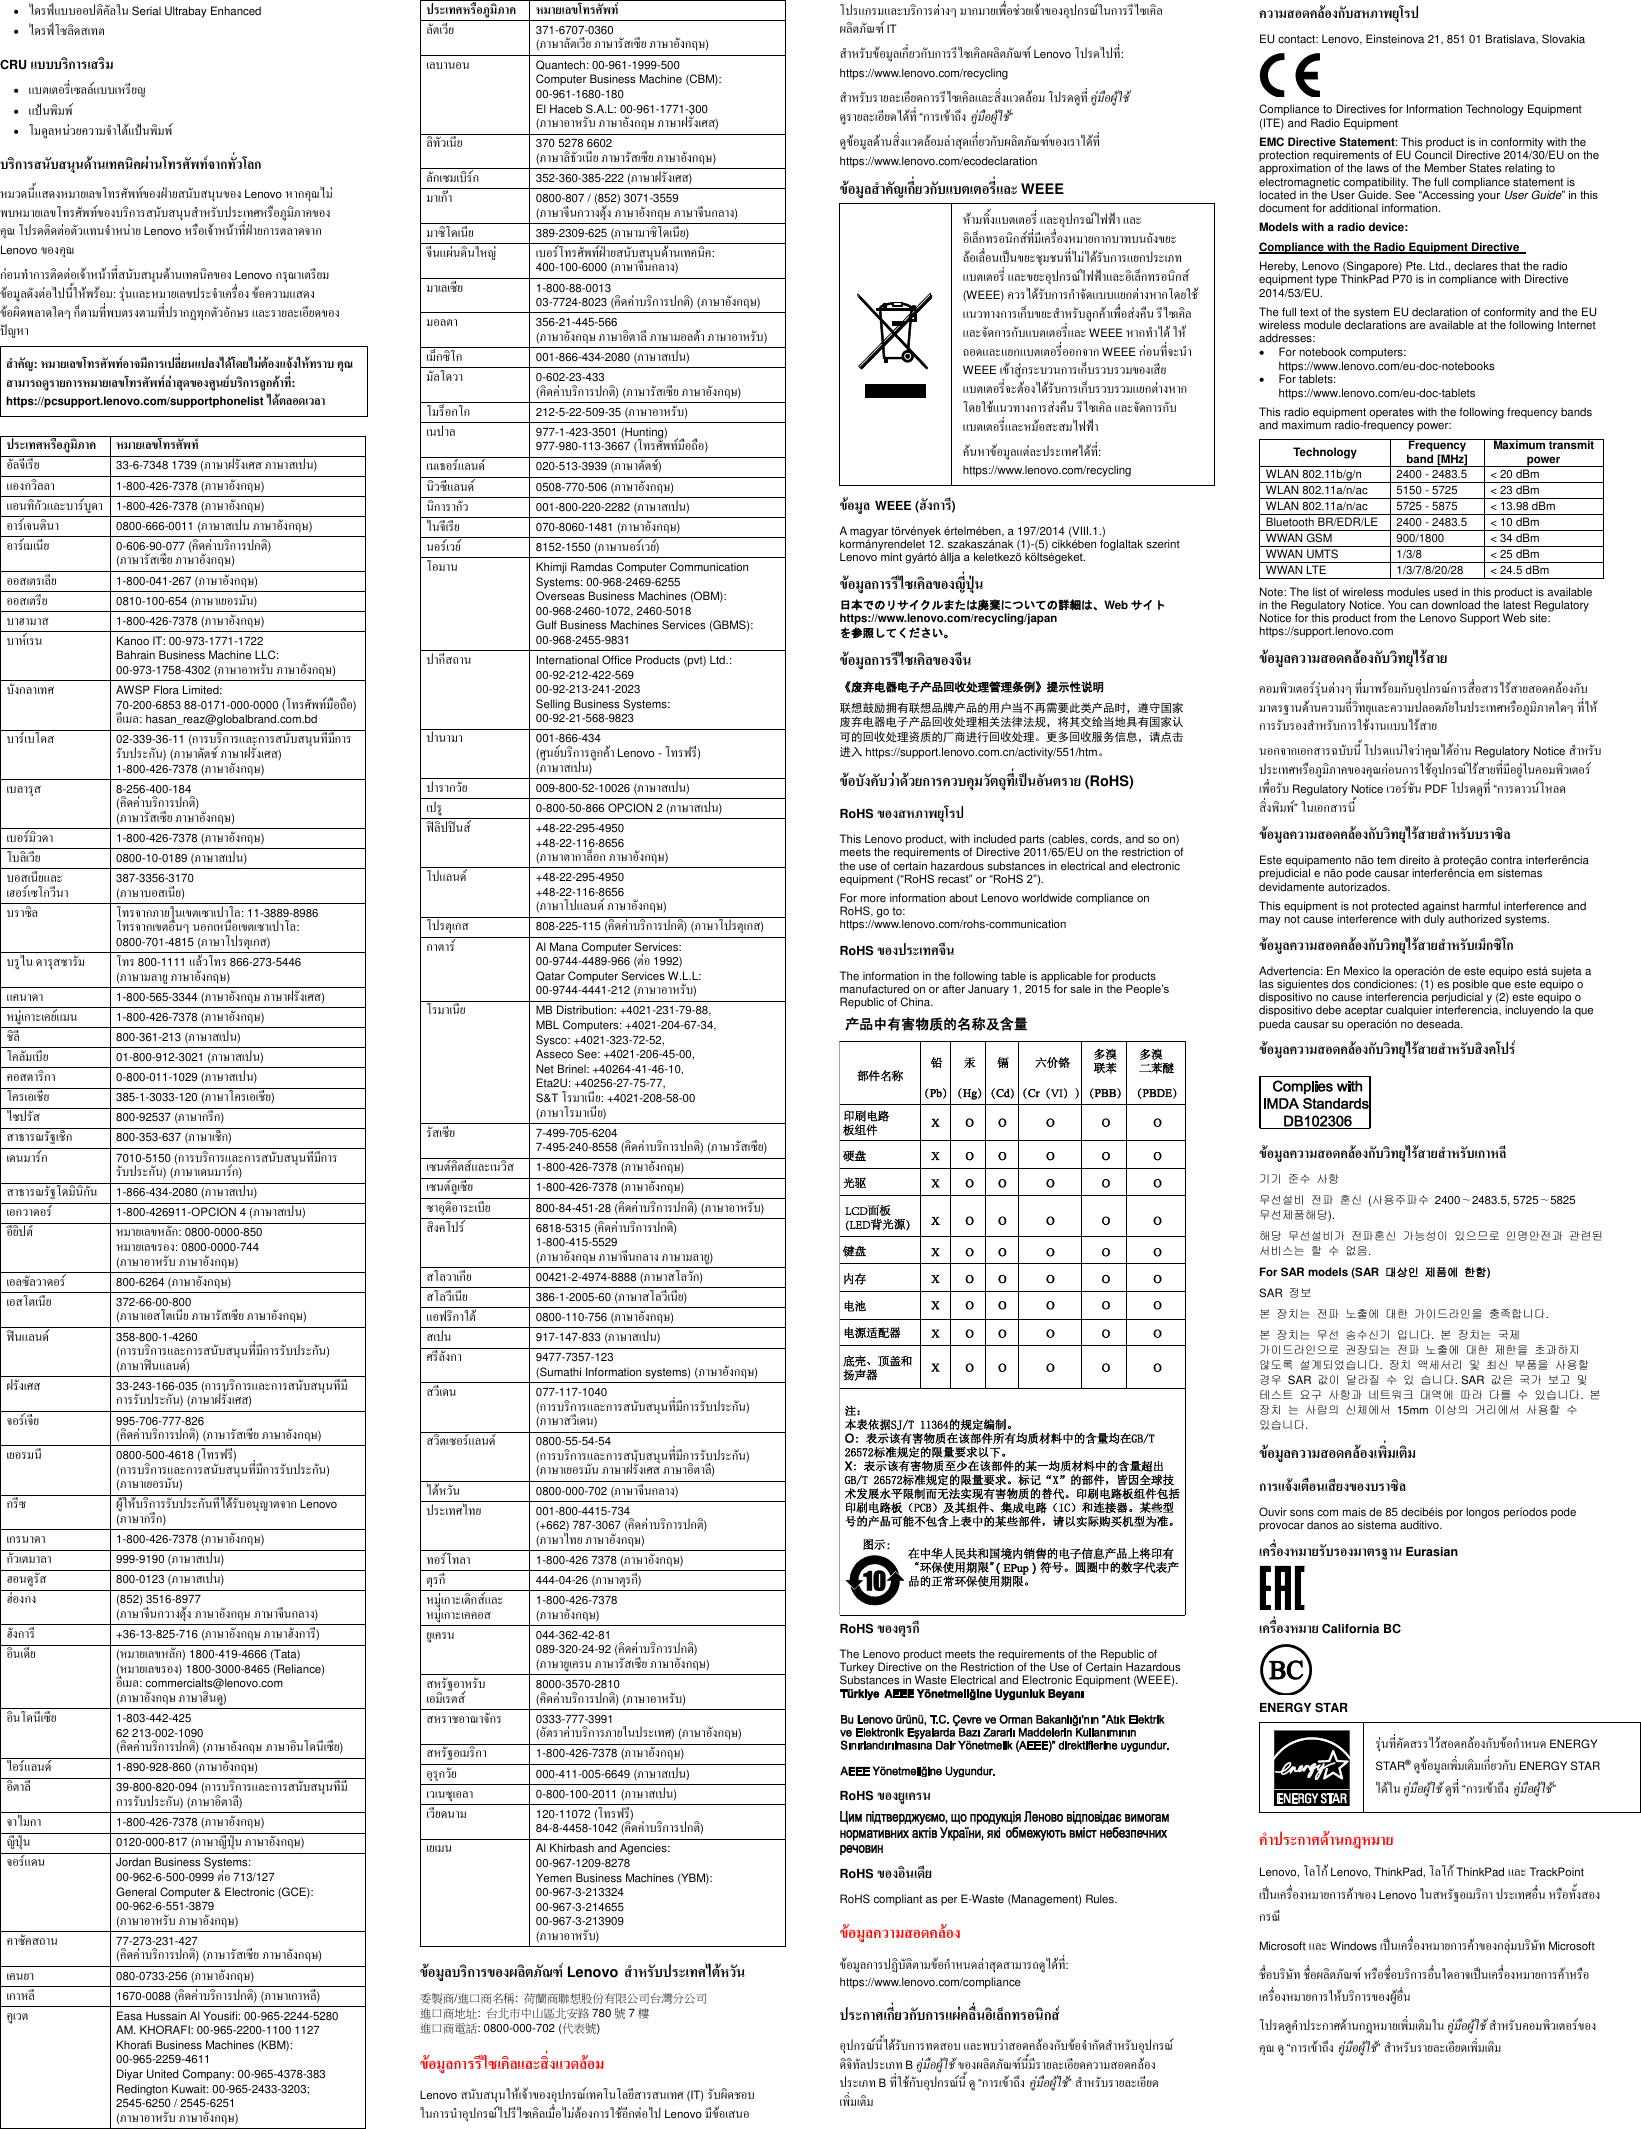 Page 2 of 2 - Lenovo 2017 Refresh (Thai) Safety, Warranty, And Setup Guide - Think Pad P70 Laptop (Think Pad) Type 20ES Swsg Th